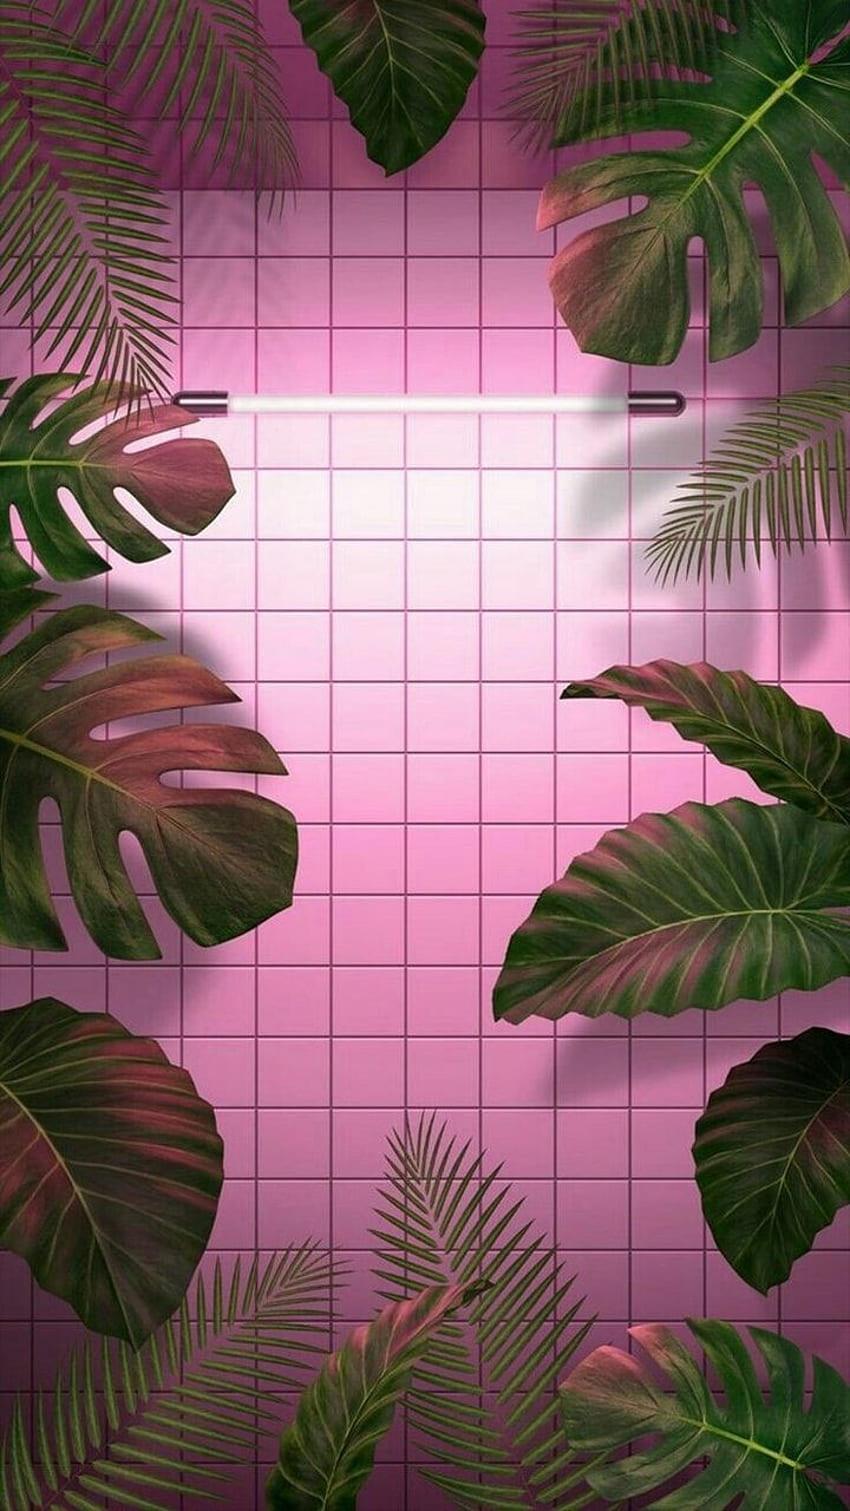 Aesthetic pink background with tropical leaves - Leaves, neon, tropical